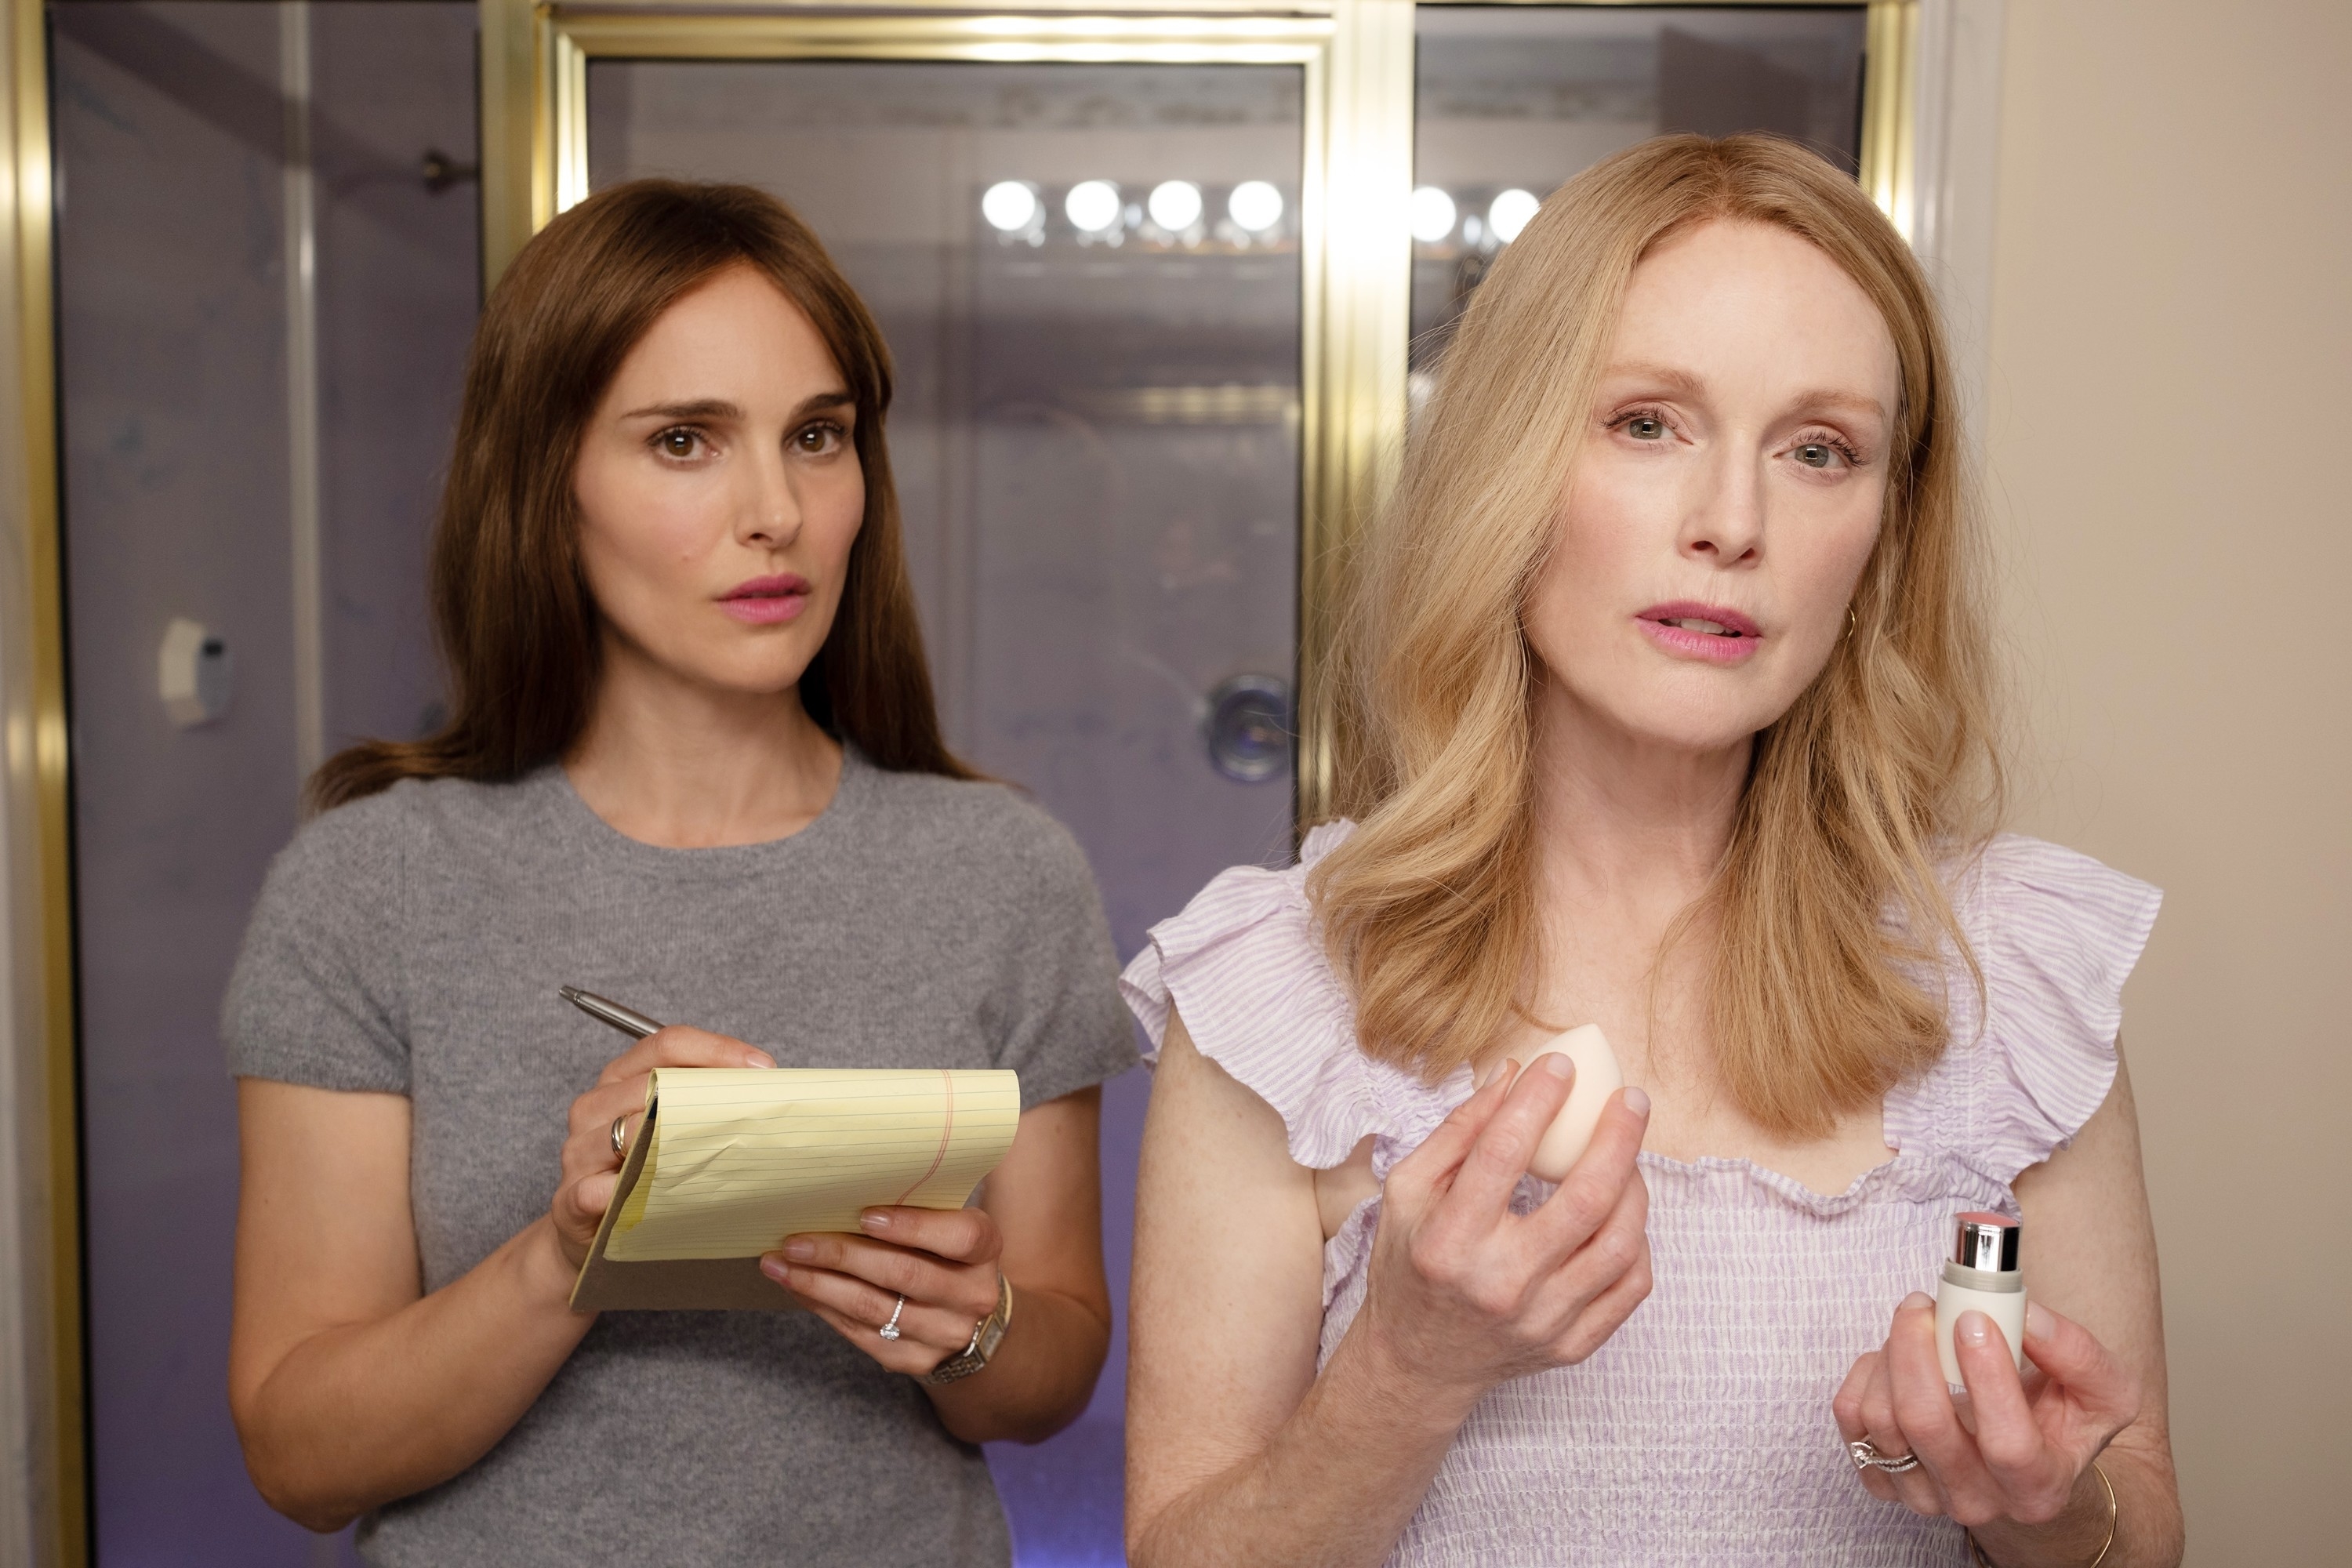 Julianne Moore and Natalie Portman in a dressing room, Natalie holding a notepad, Julianne with makeup, in May December